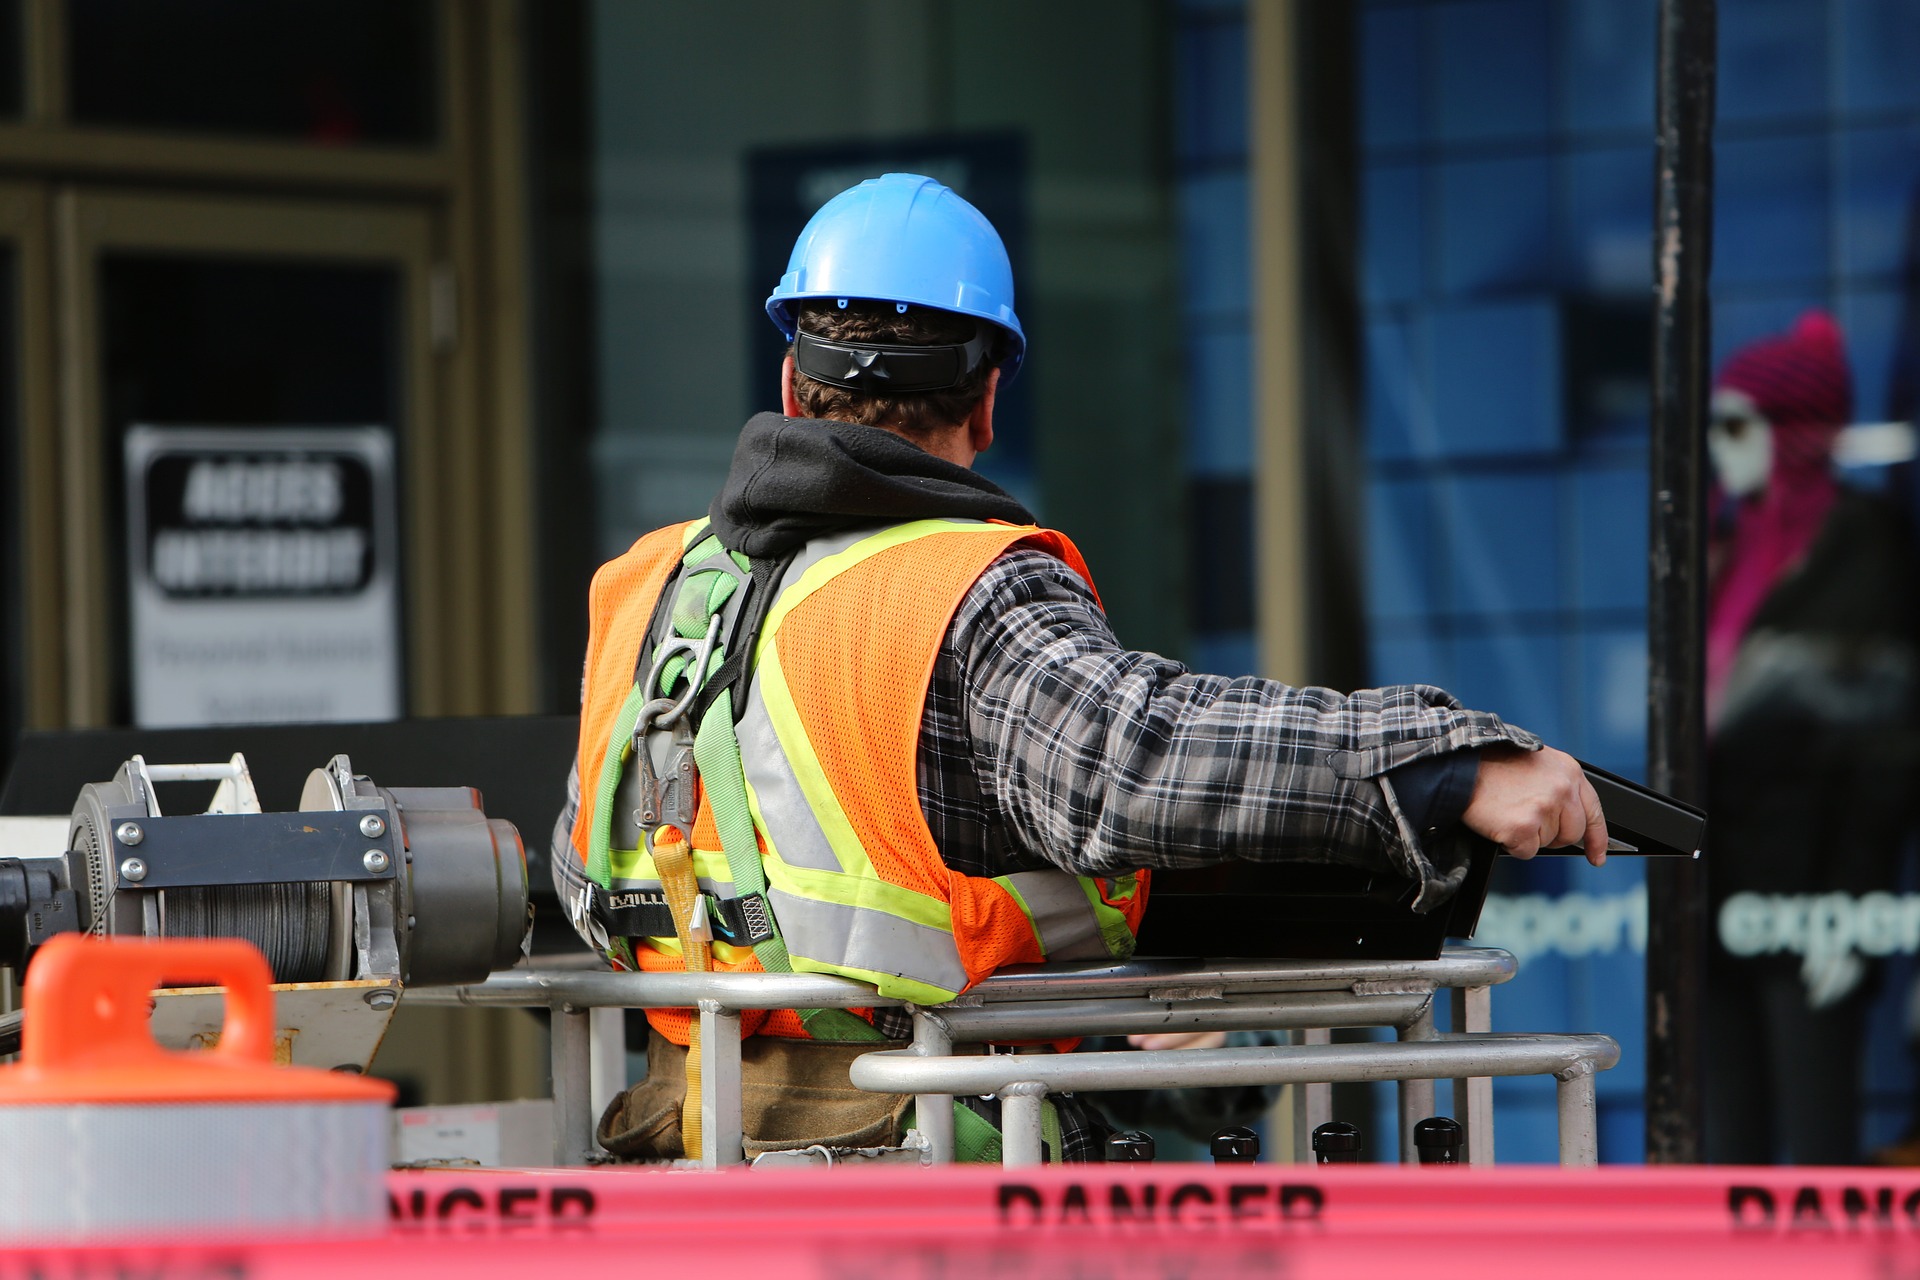 Male worker on a building site